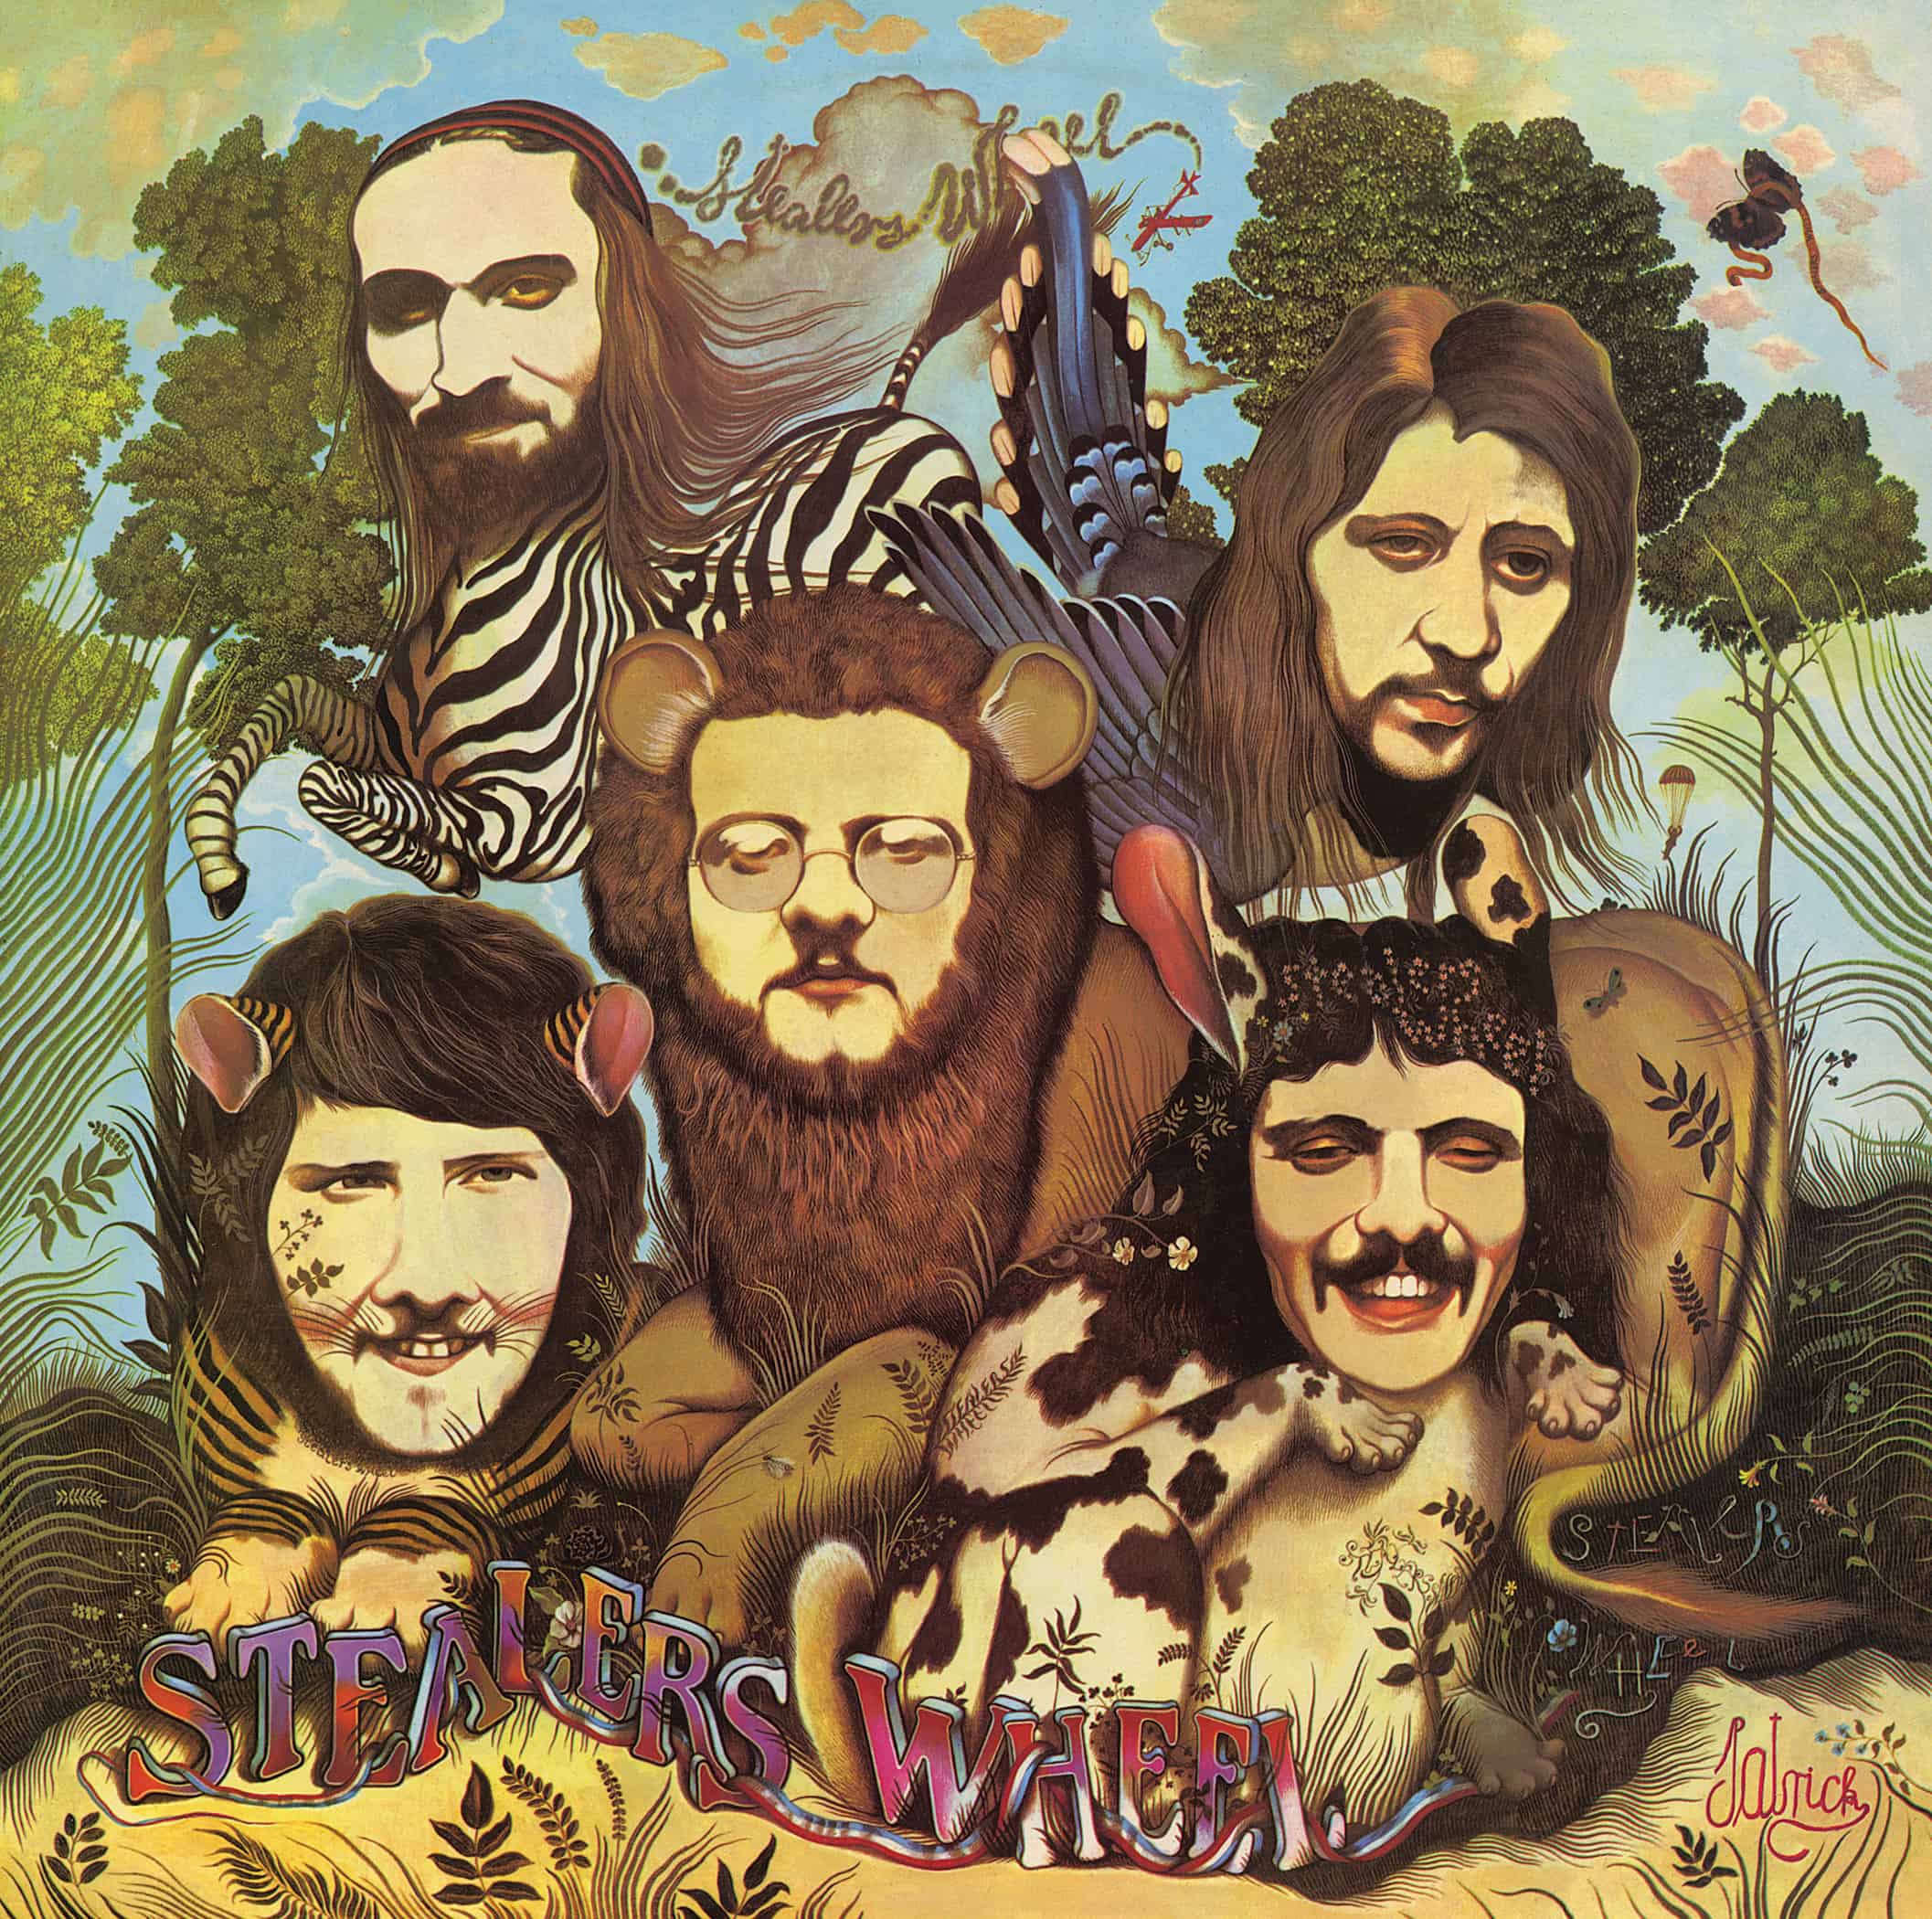 Gerry Rafferty and Stealers Wheel Collected